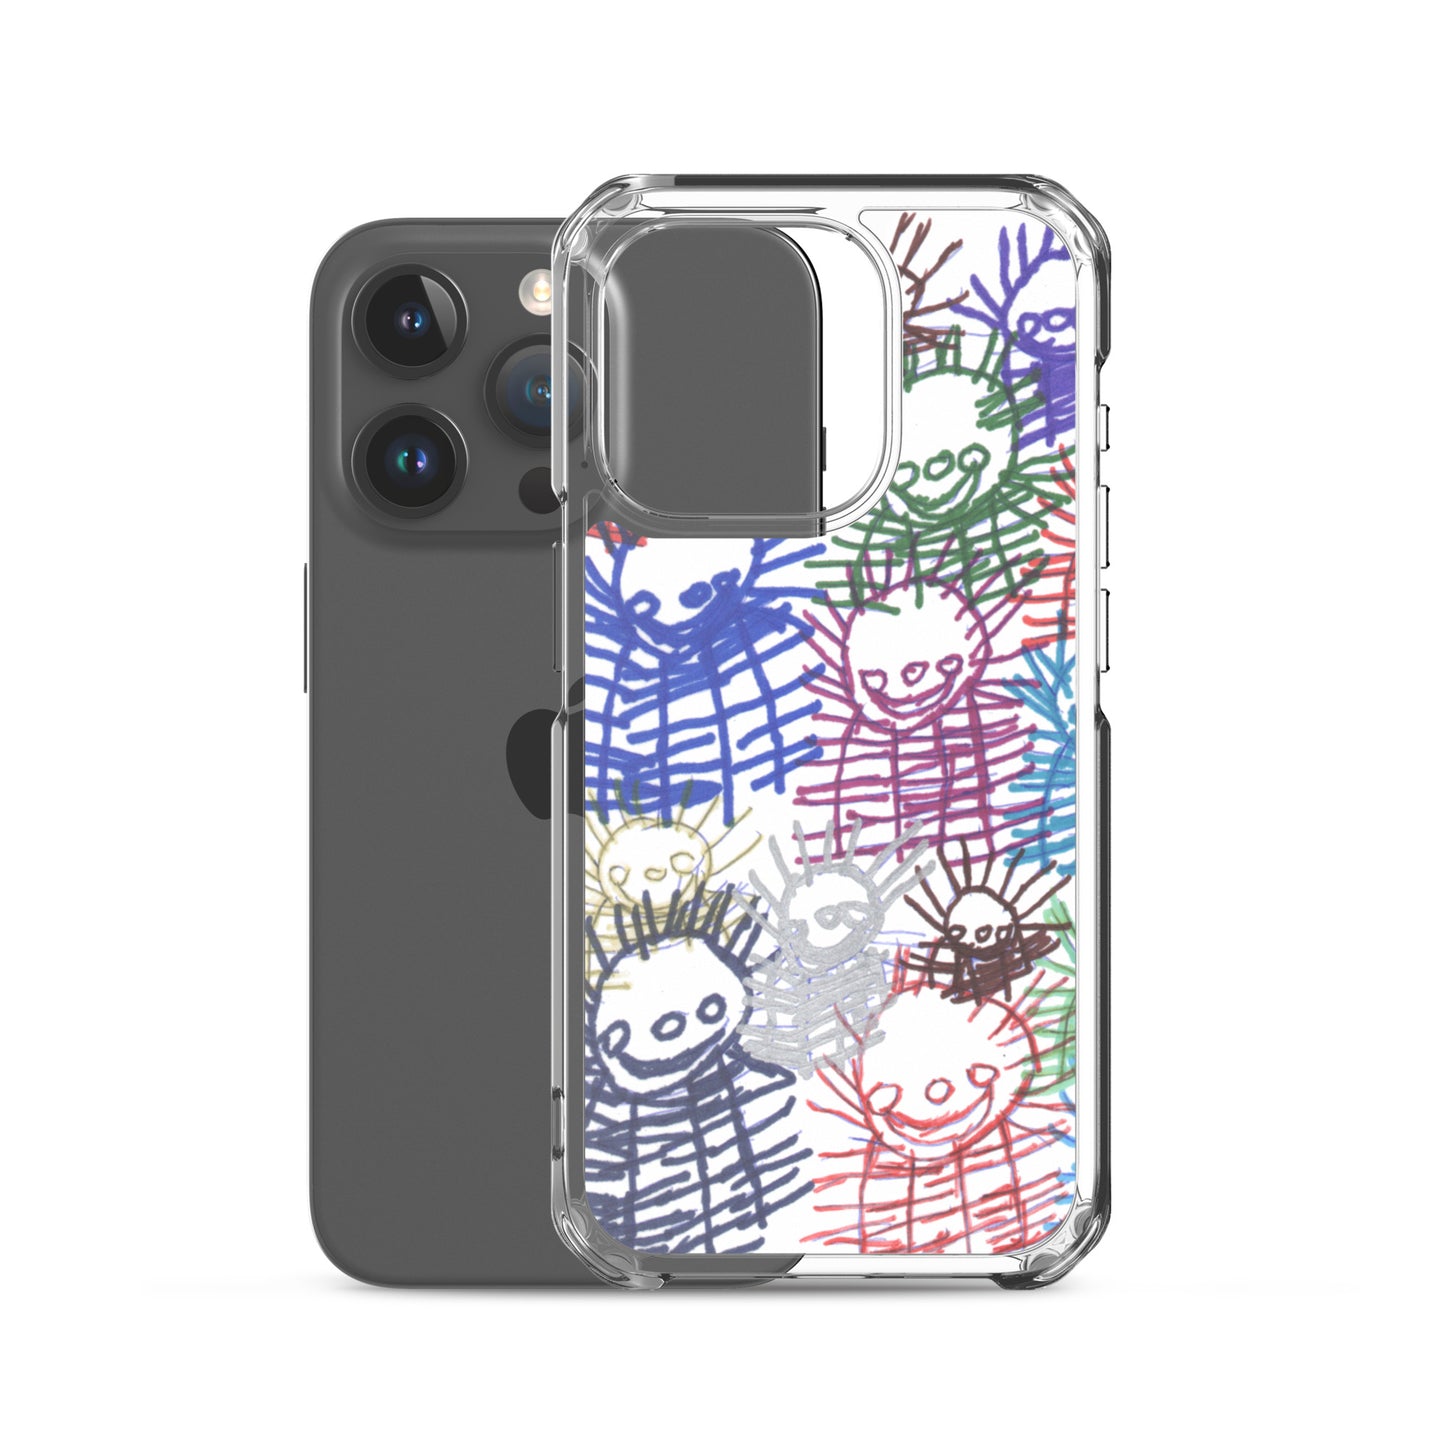 iPhone Case - "Pretty Flower's 60th Birthday Party"